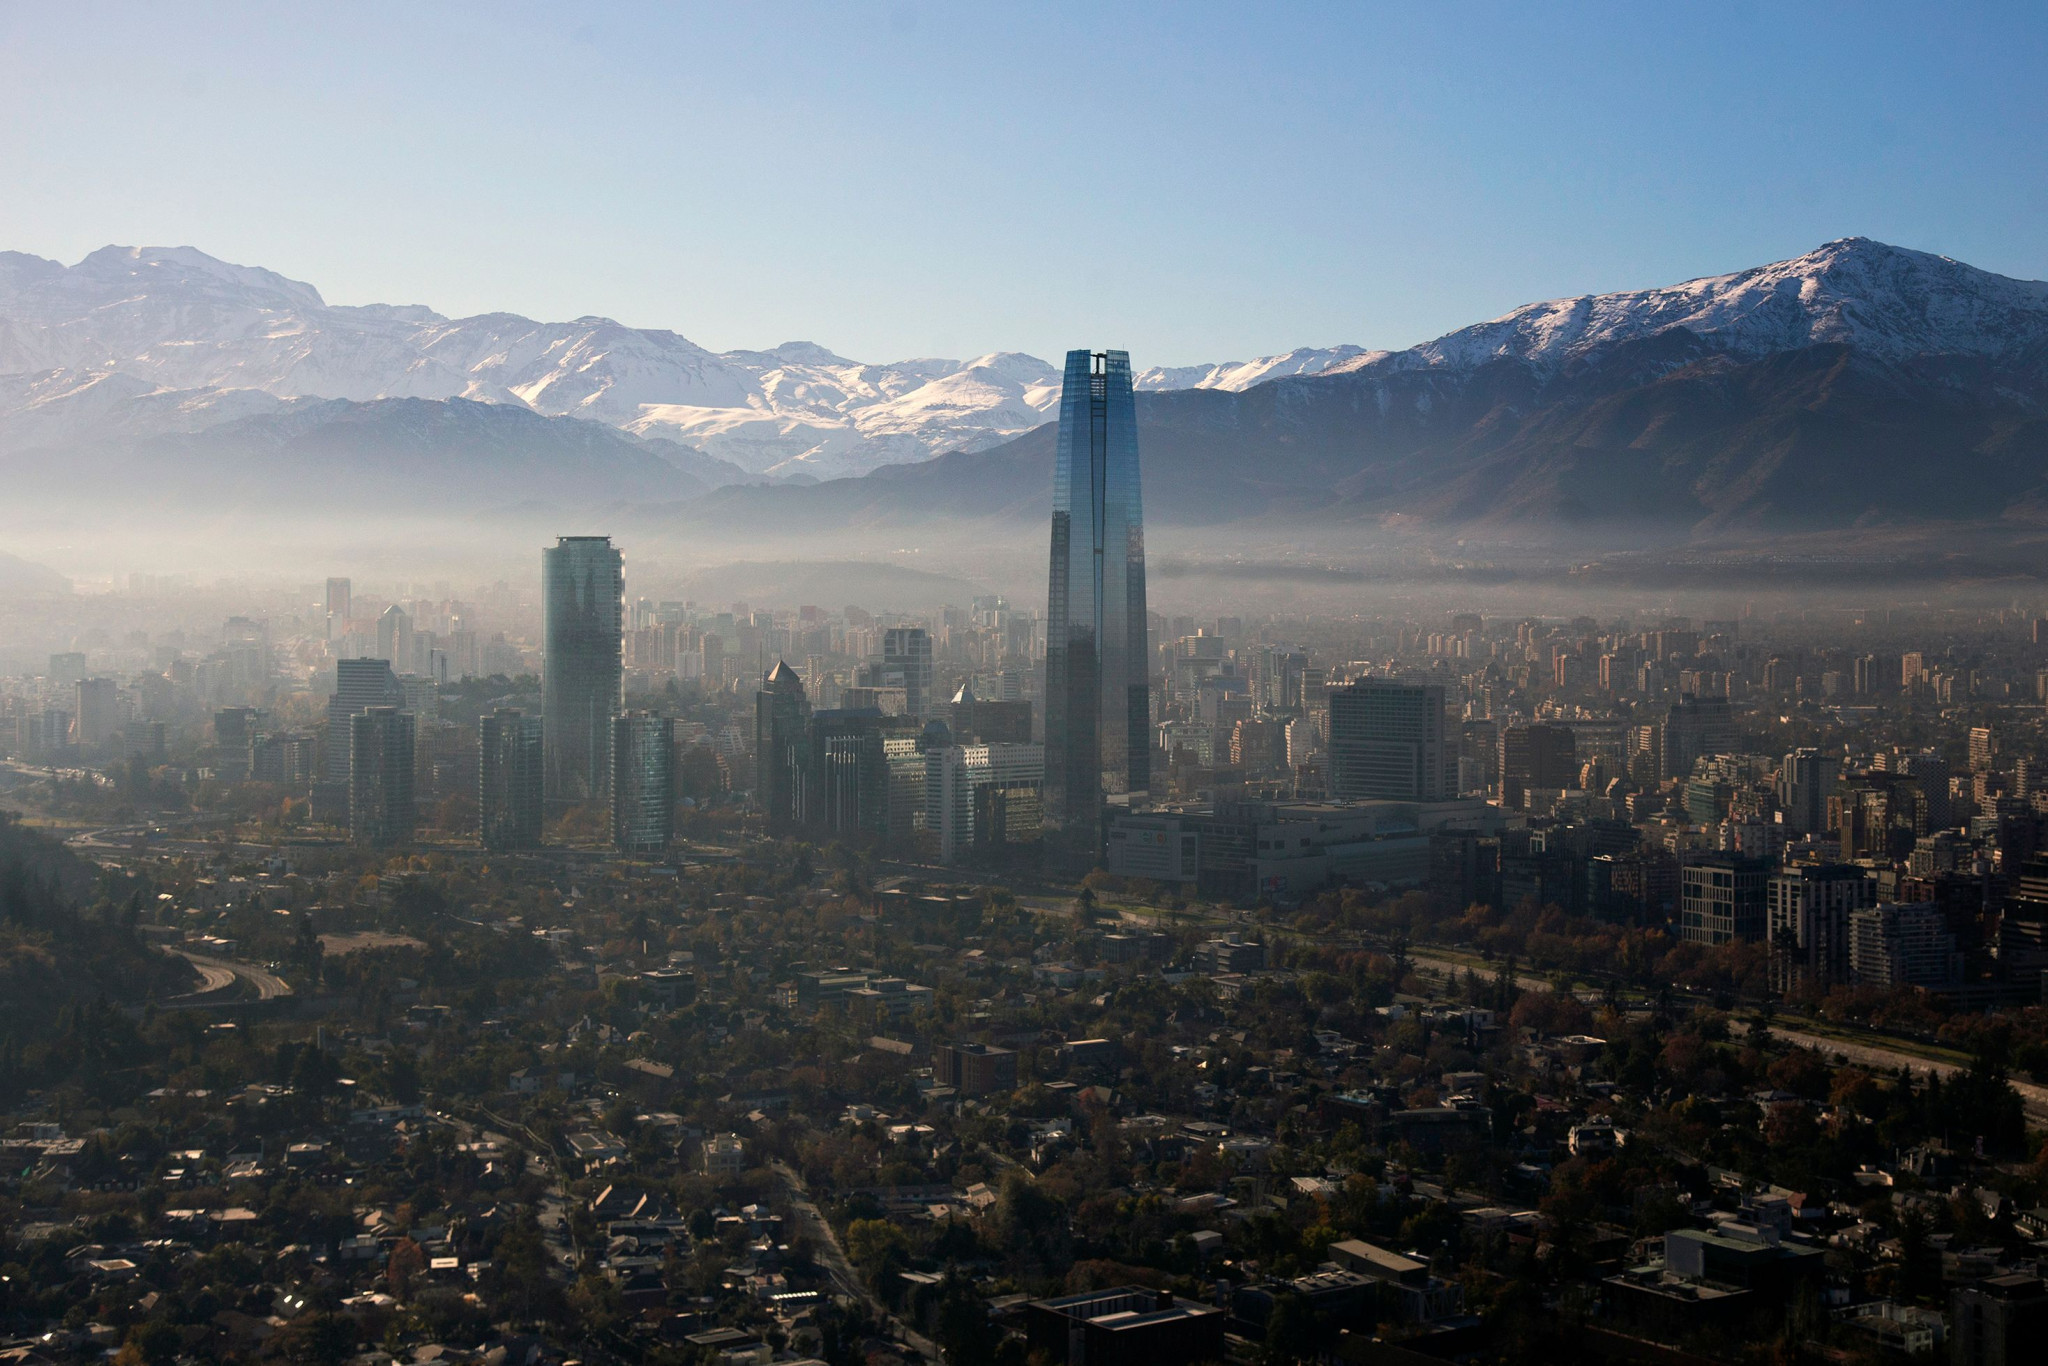 Santiago, capital of Chile, is set to host the Pan American and Parapan American Games for the first time in 2023 ©Getty Images